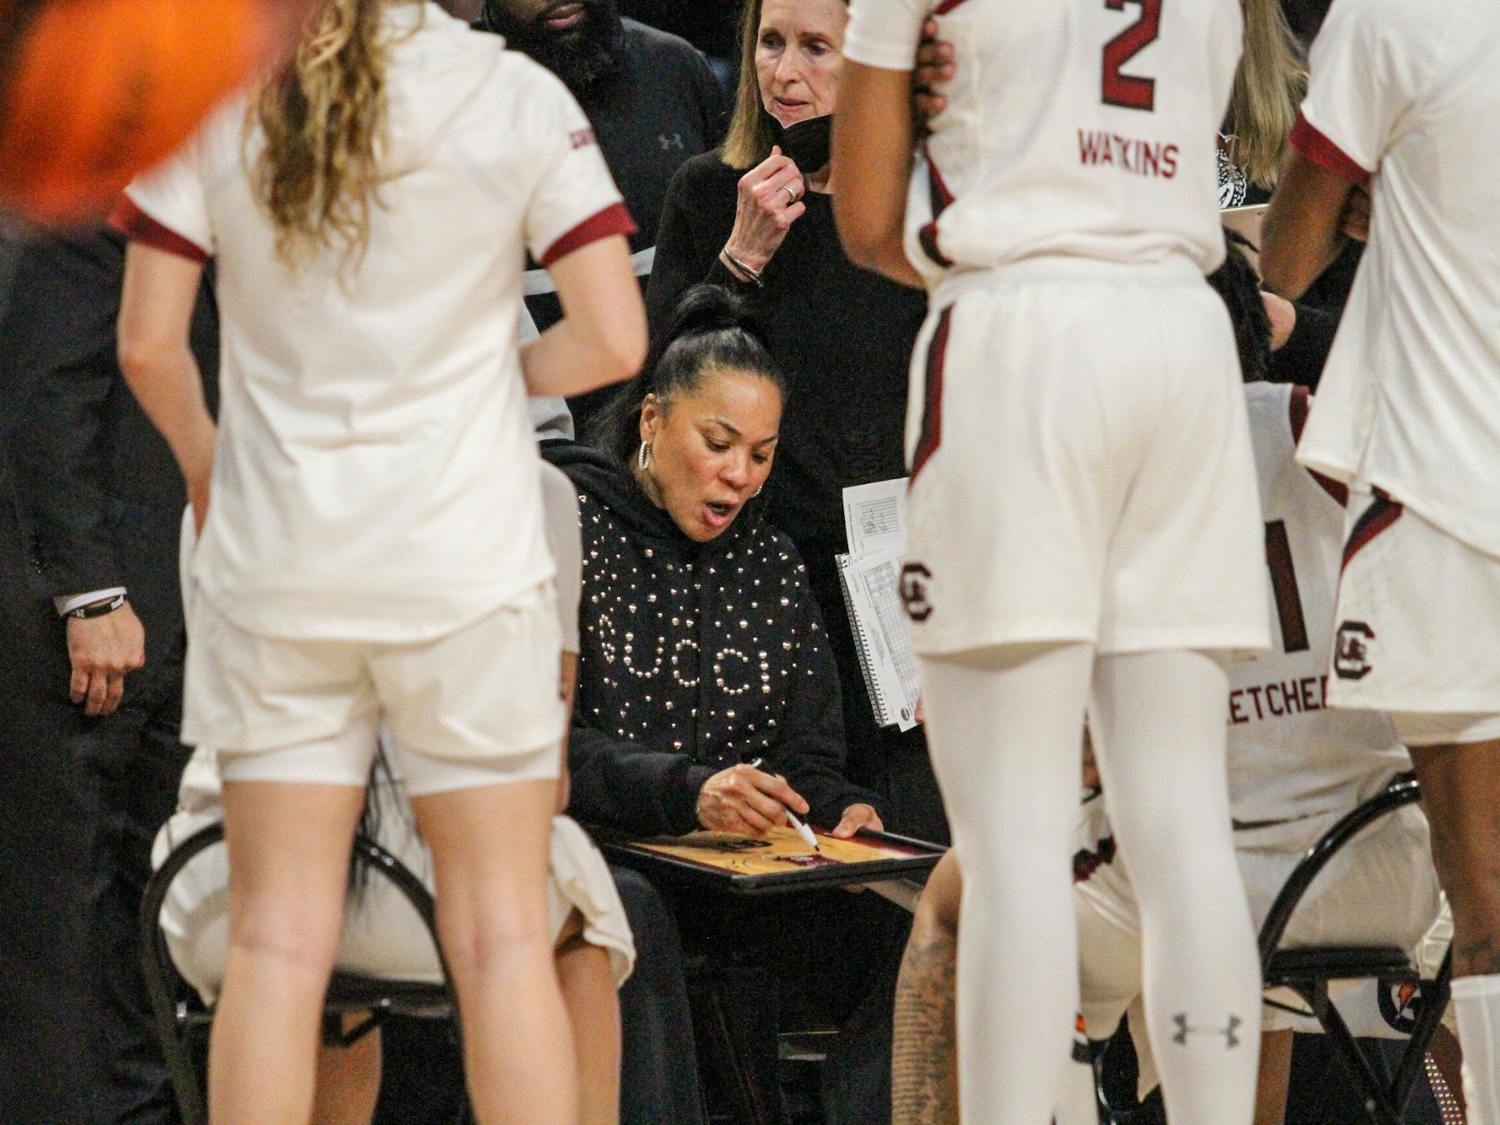 Head coach Dawn Staley draws up a play during a time out at South Carolina’s game against Georgia at Colonial Life Arena on Feb. 26, 2023. The Gamecocks beat the Bulldogs 73-63.